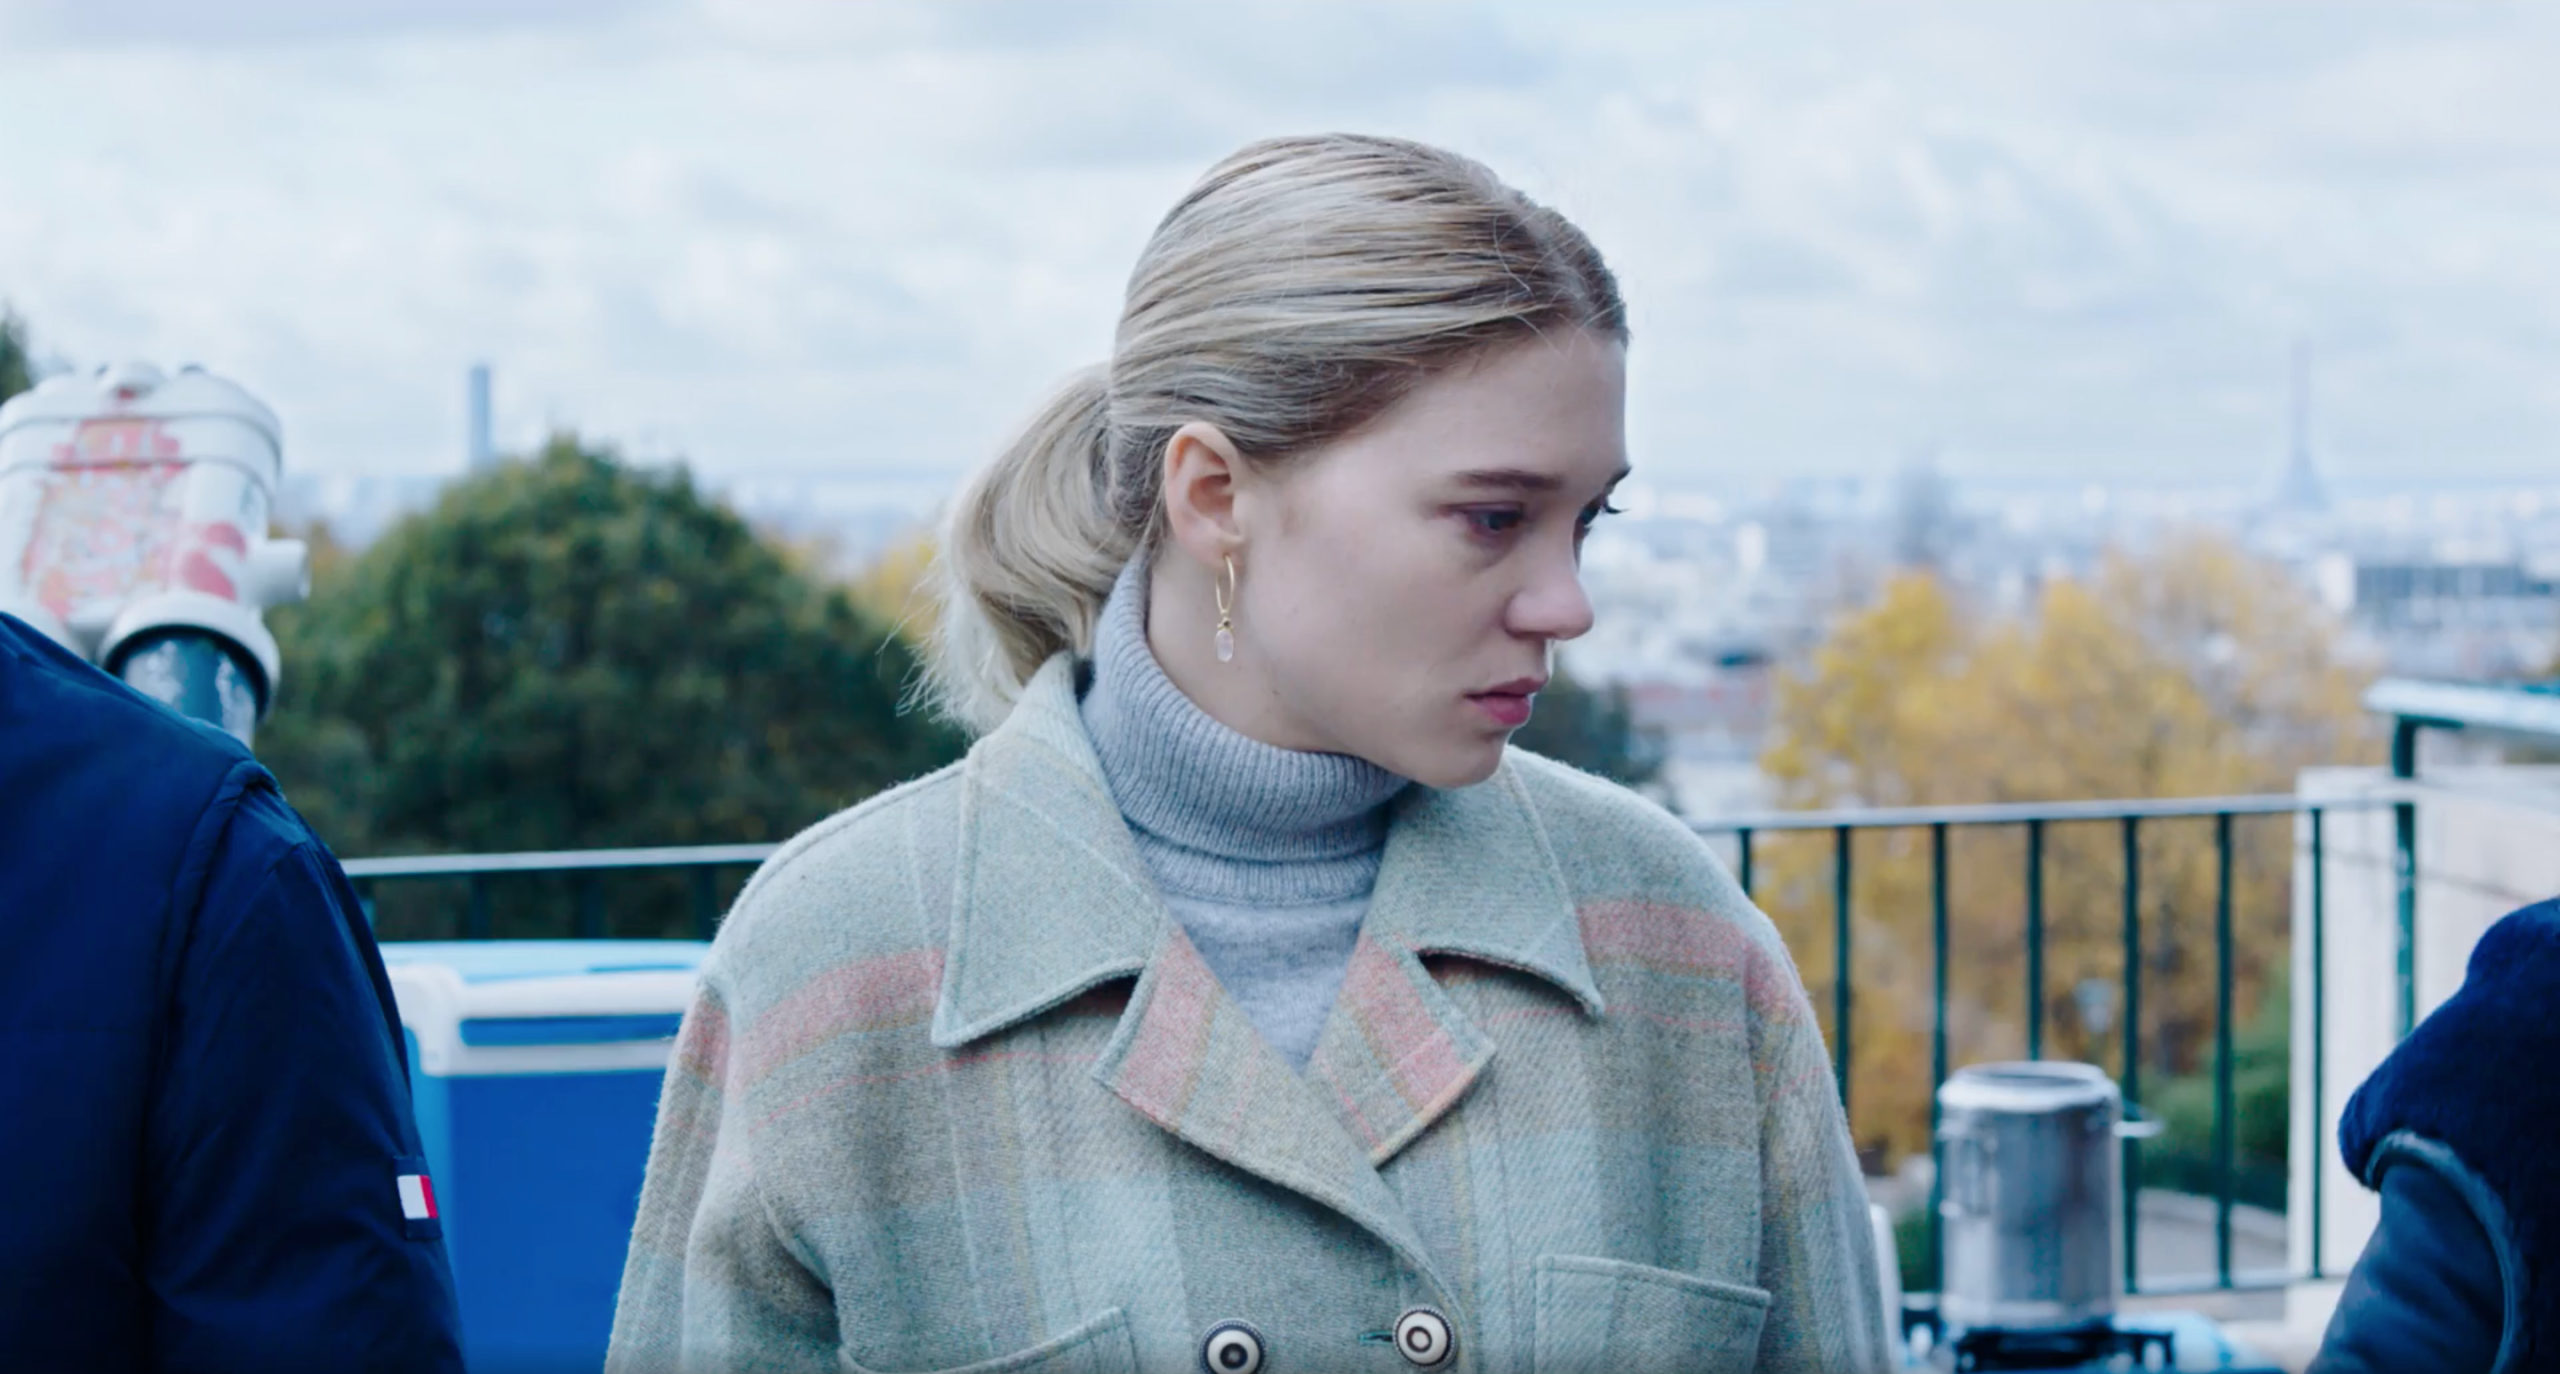 Léa Seydoux is our favourite under-the-radar French fashion icon